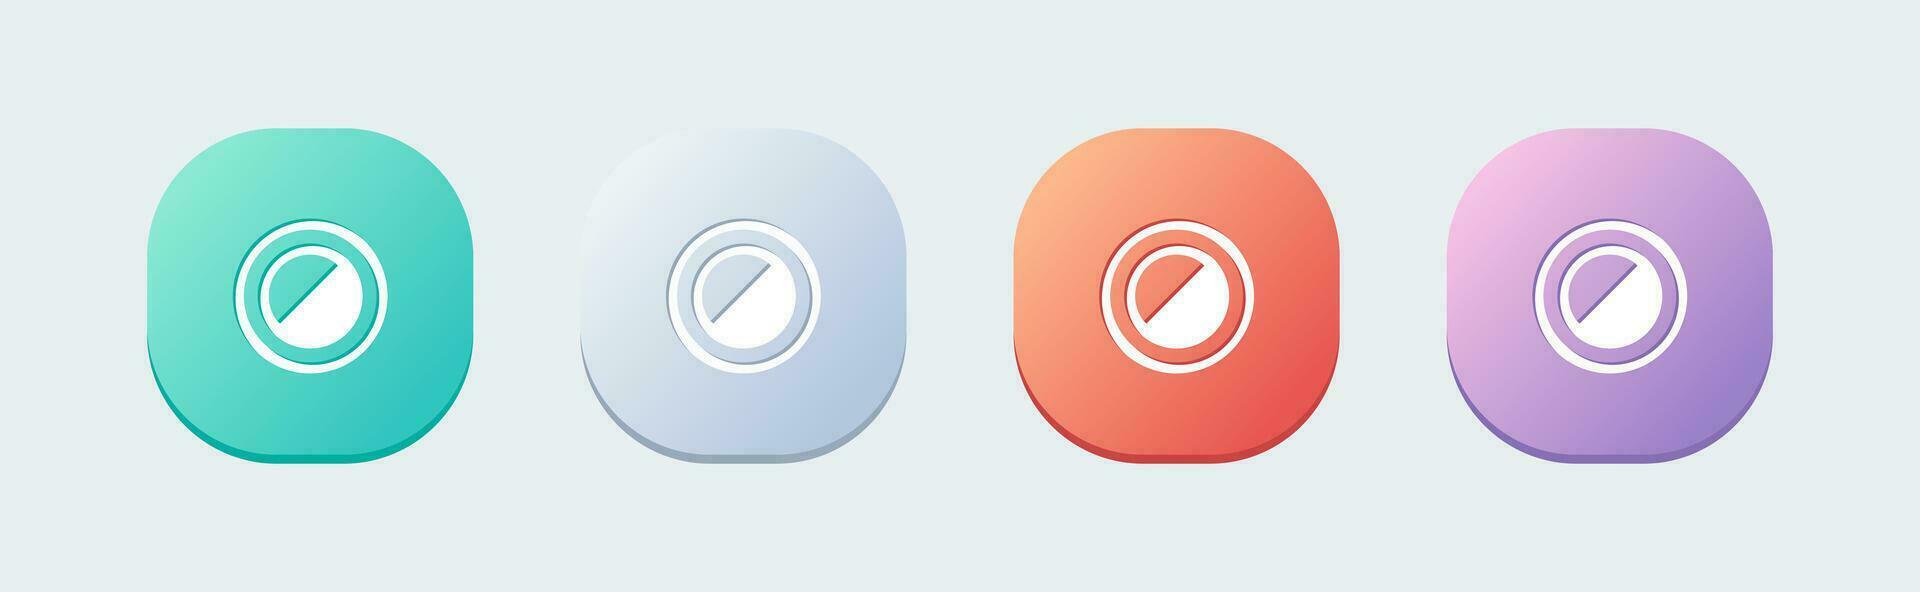 Contrast solid icon in flat design style. Brightness signs vector illustration.